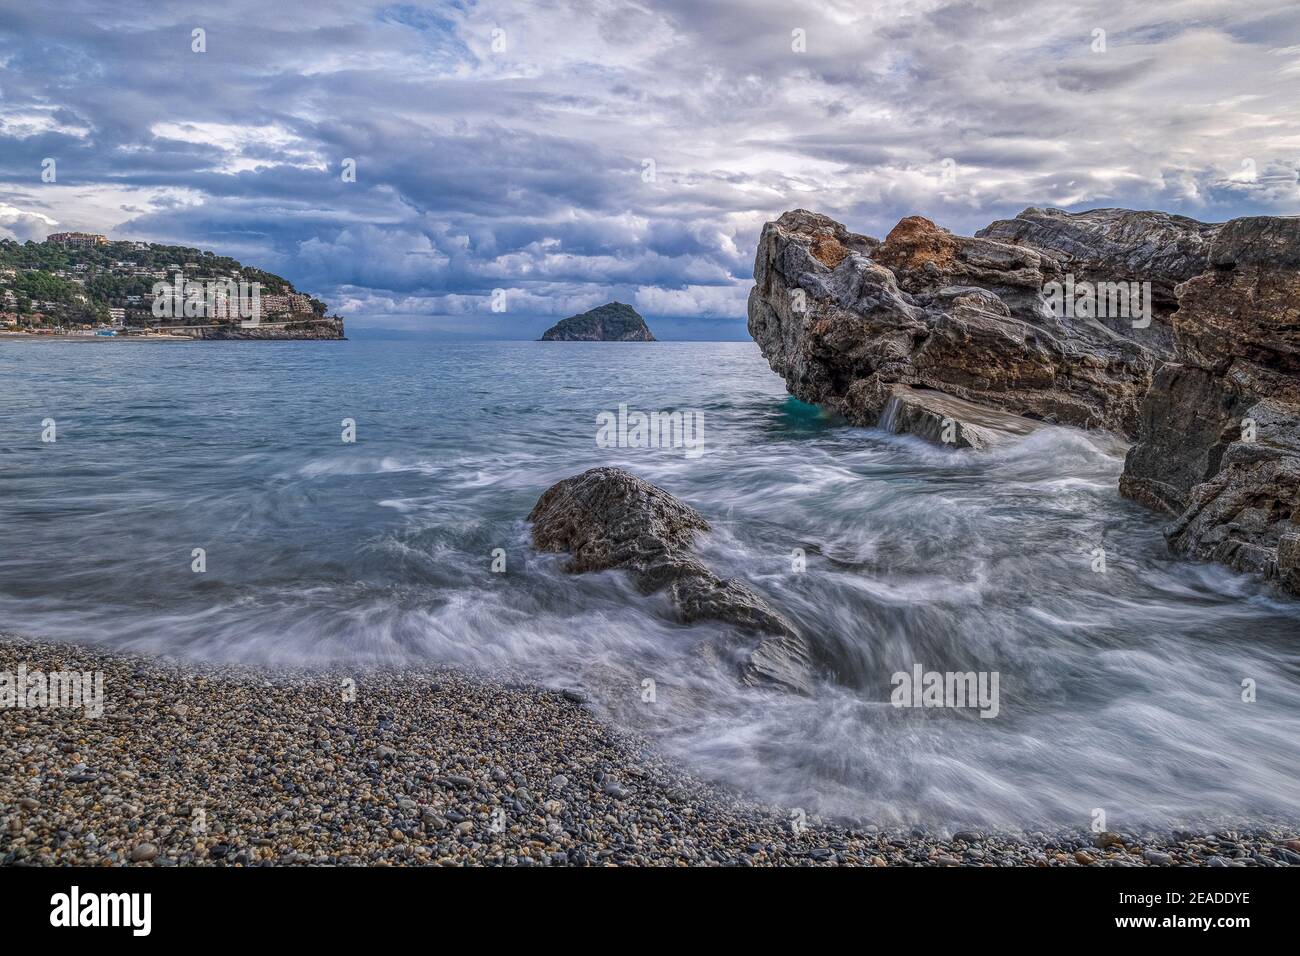 Italy Liguria Bergeggi is famous for its small island called 'Bergeggi island'. It is located on the Ligurian Riviera a stone's throw from Savona and just before Spotorno. Stock Photo